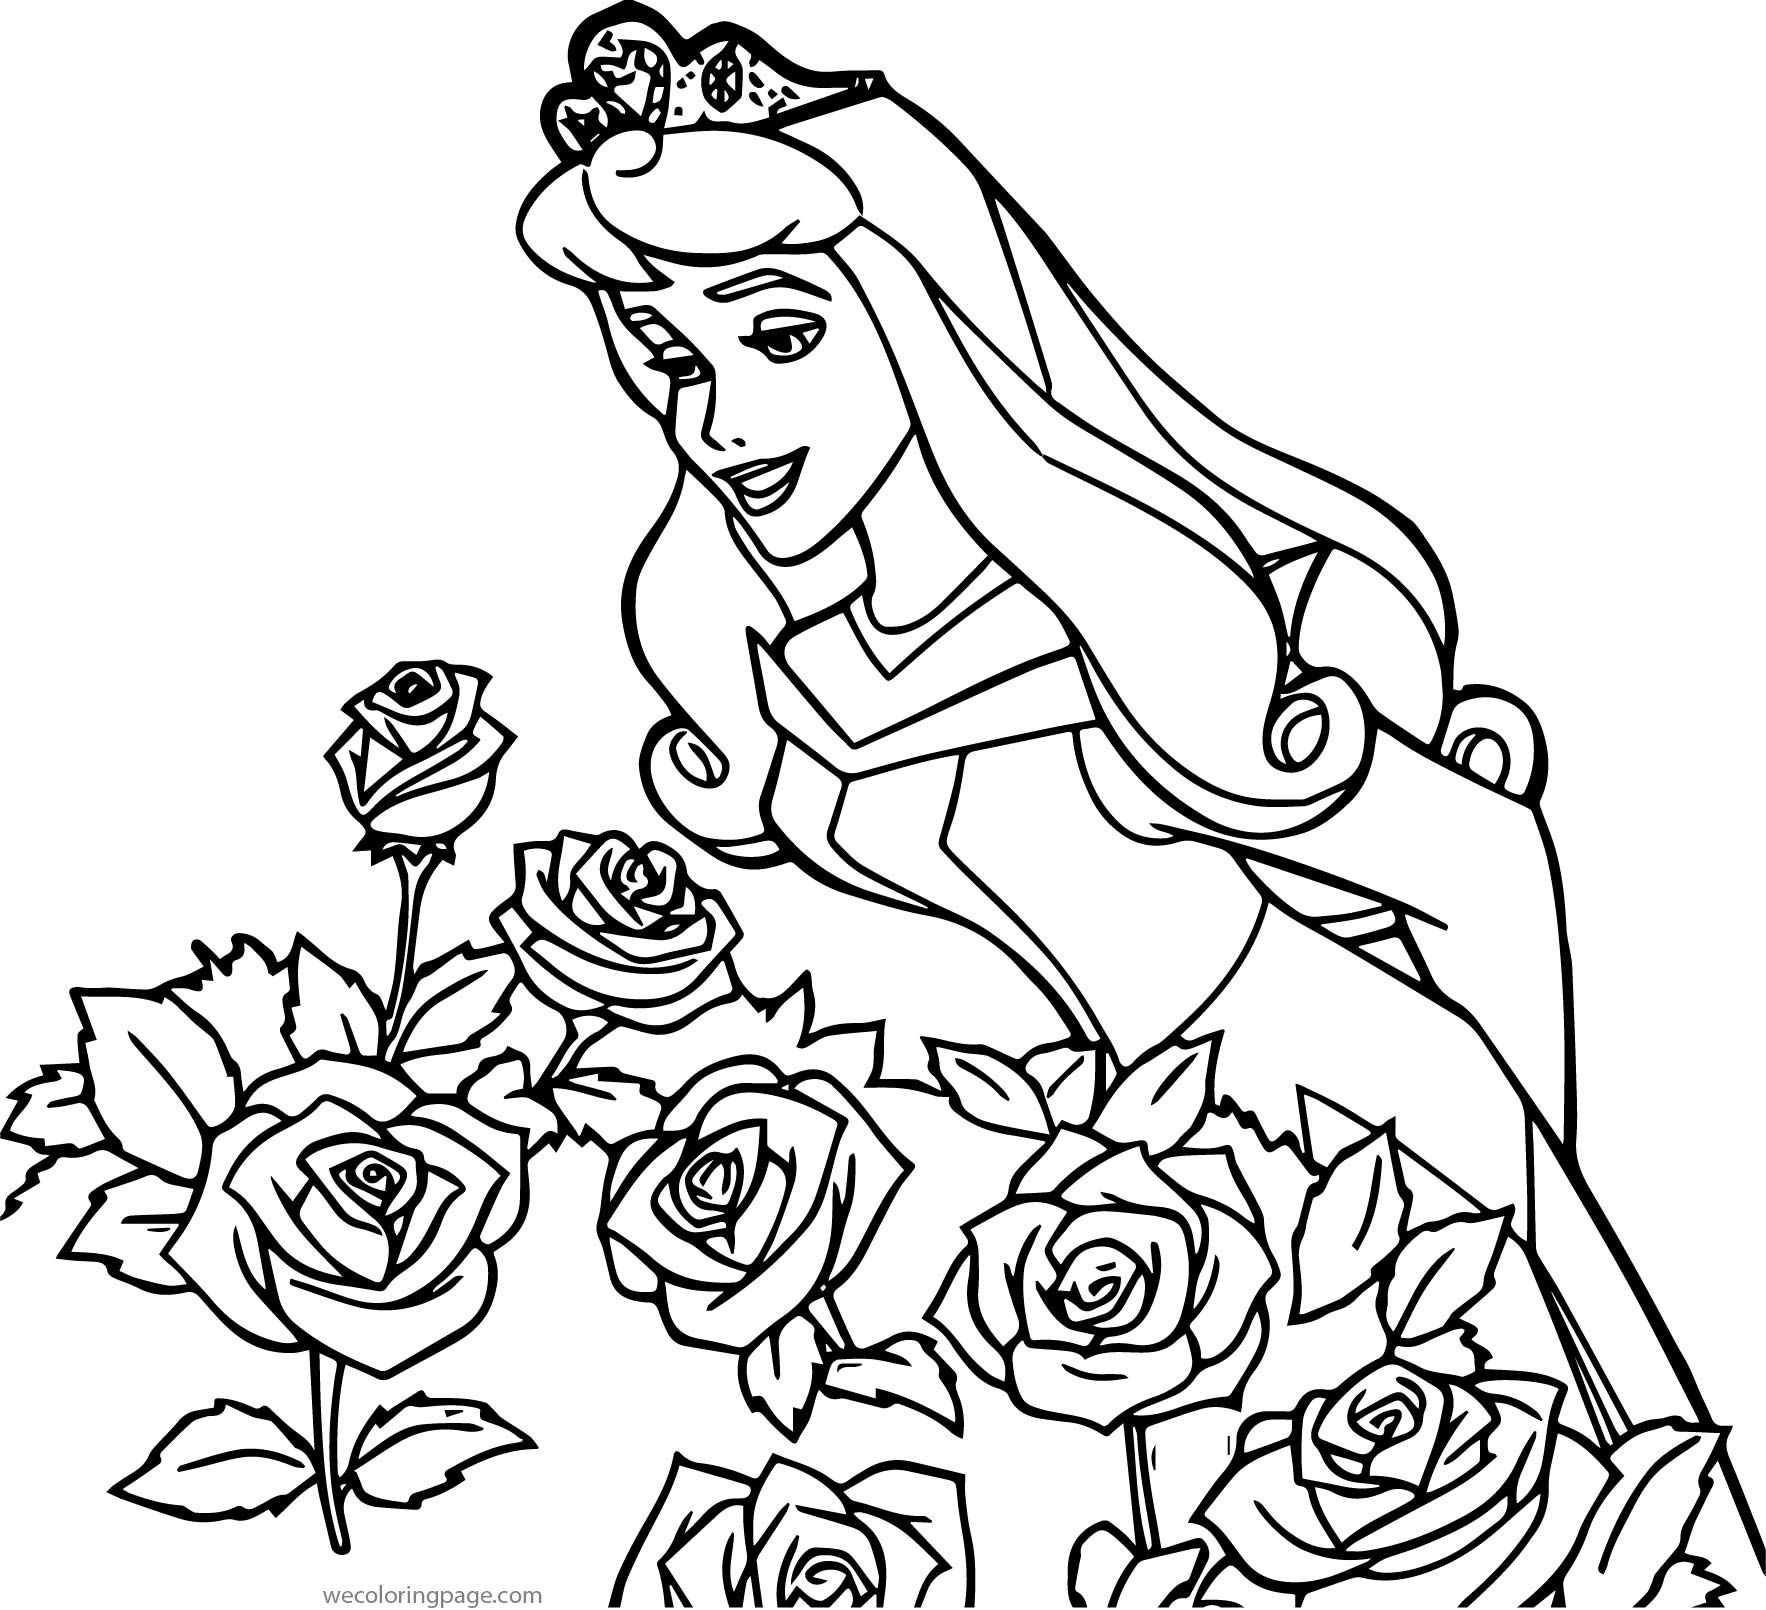 Download Princess Drawing Easy at PaintingValley.com | Explore ...